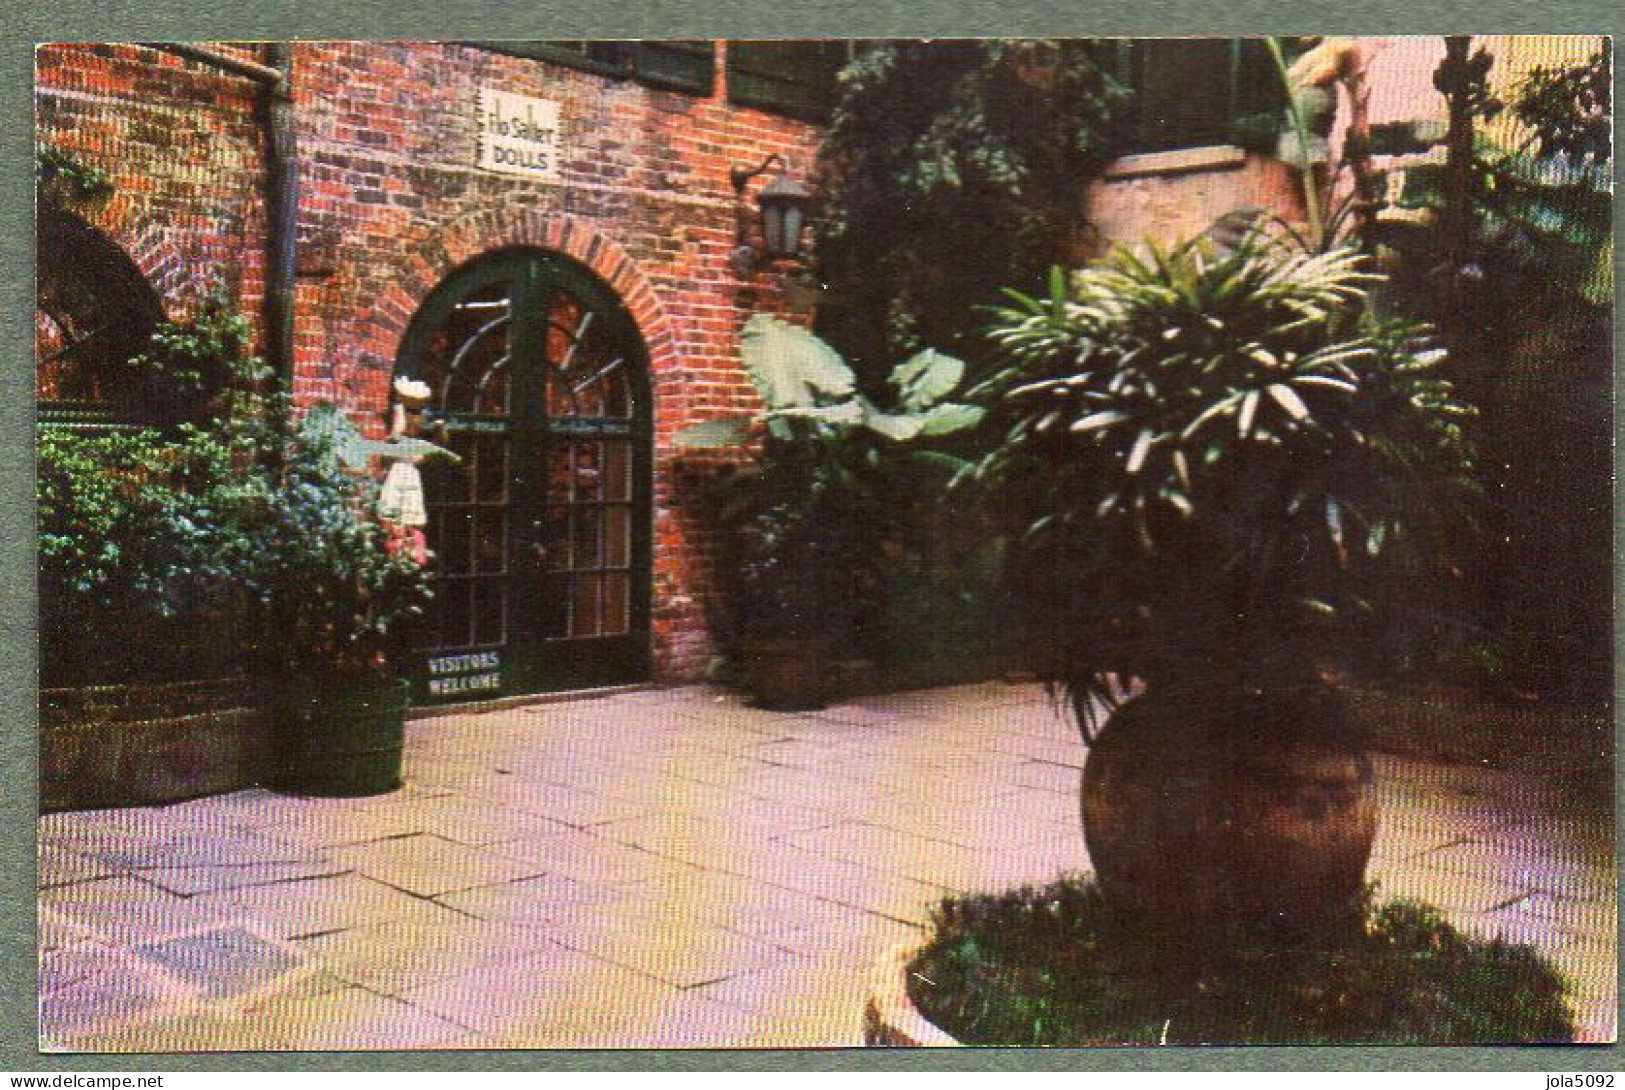 USA - NEW ORLEANS - Brulatour Courtyard - 520 Royal Street - New Orleans